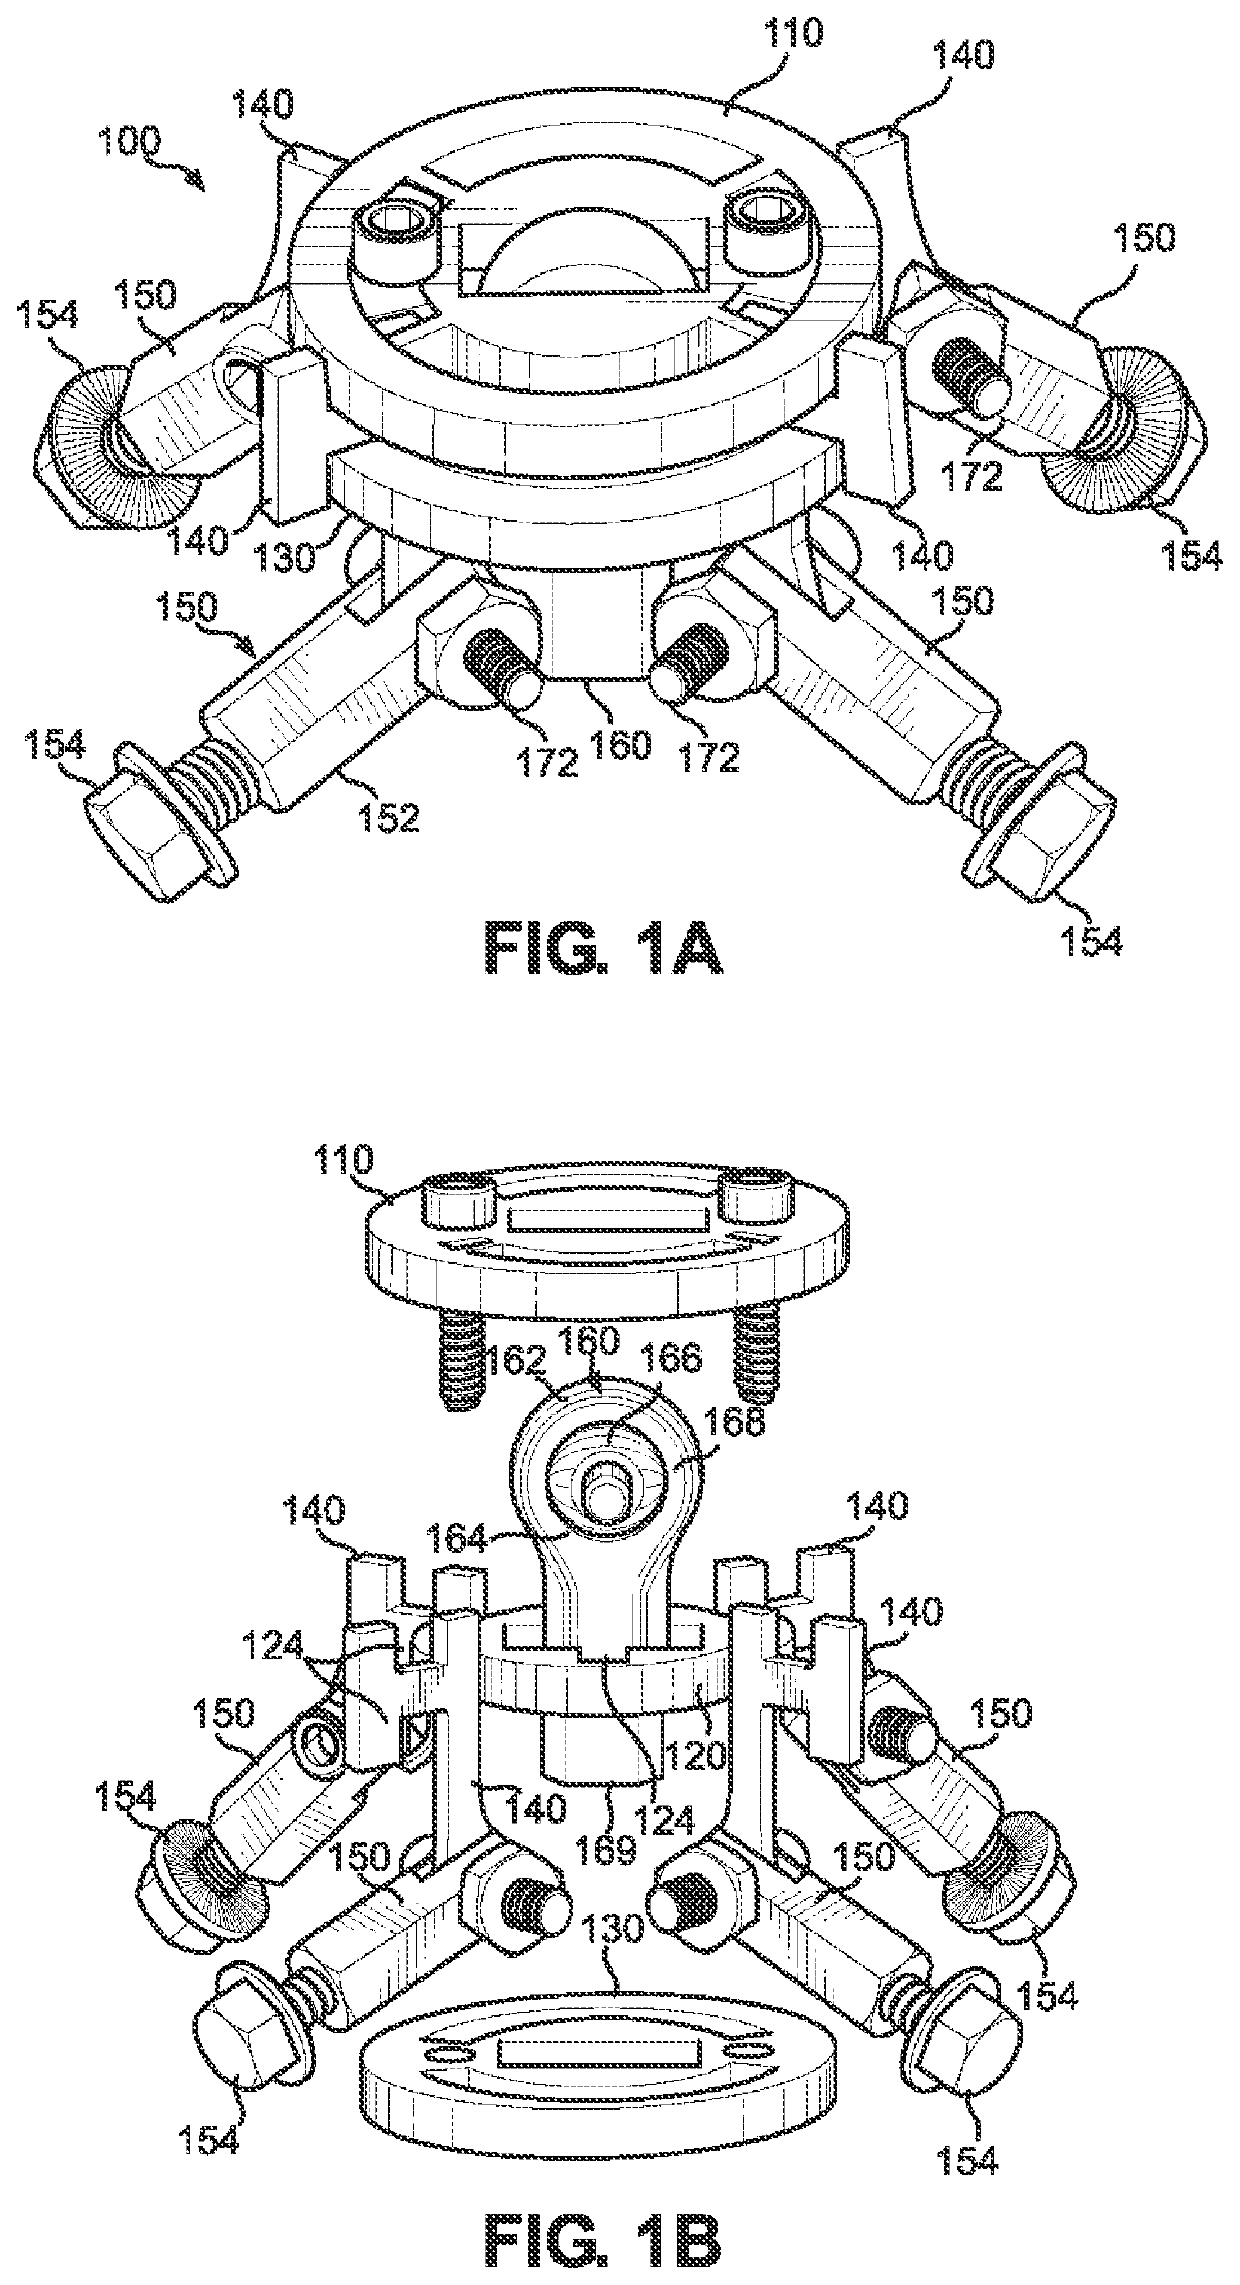 Articulated joint mechanism for cable-based and tensegrity structures